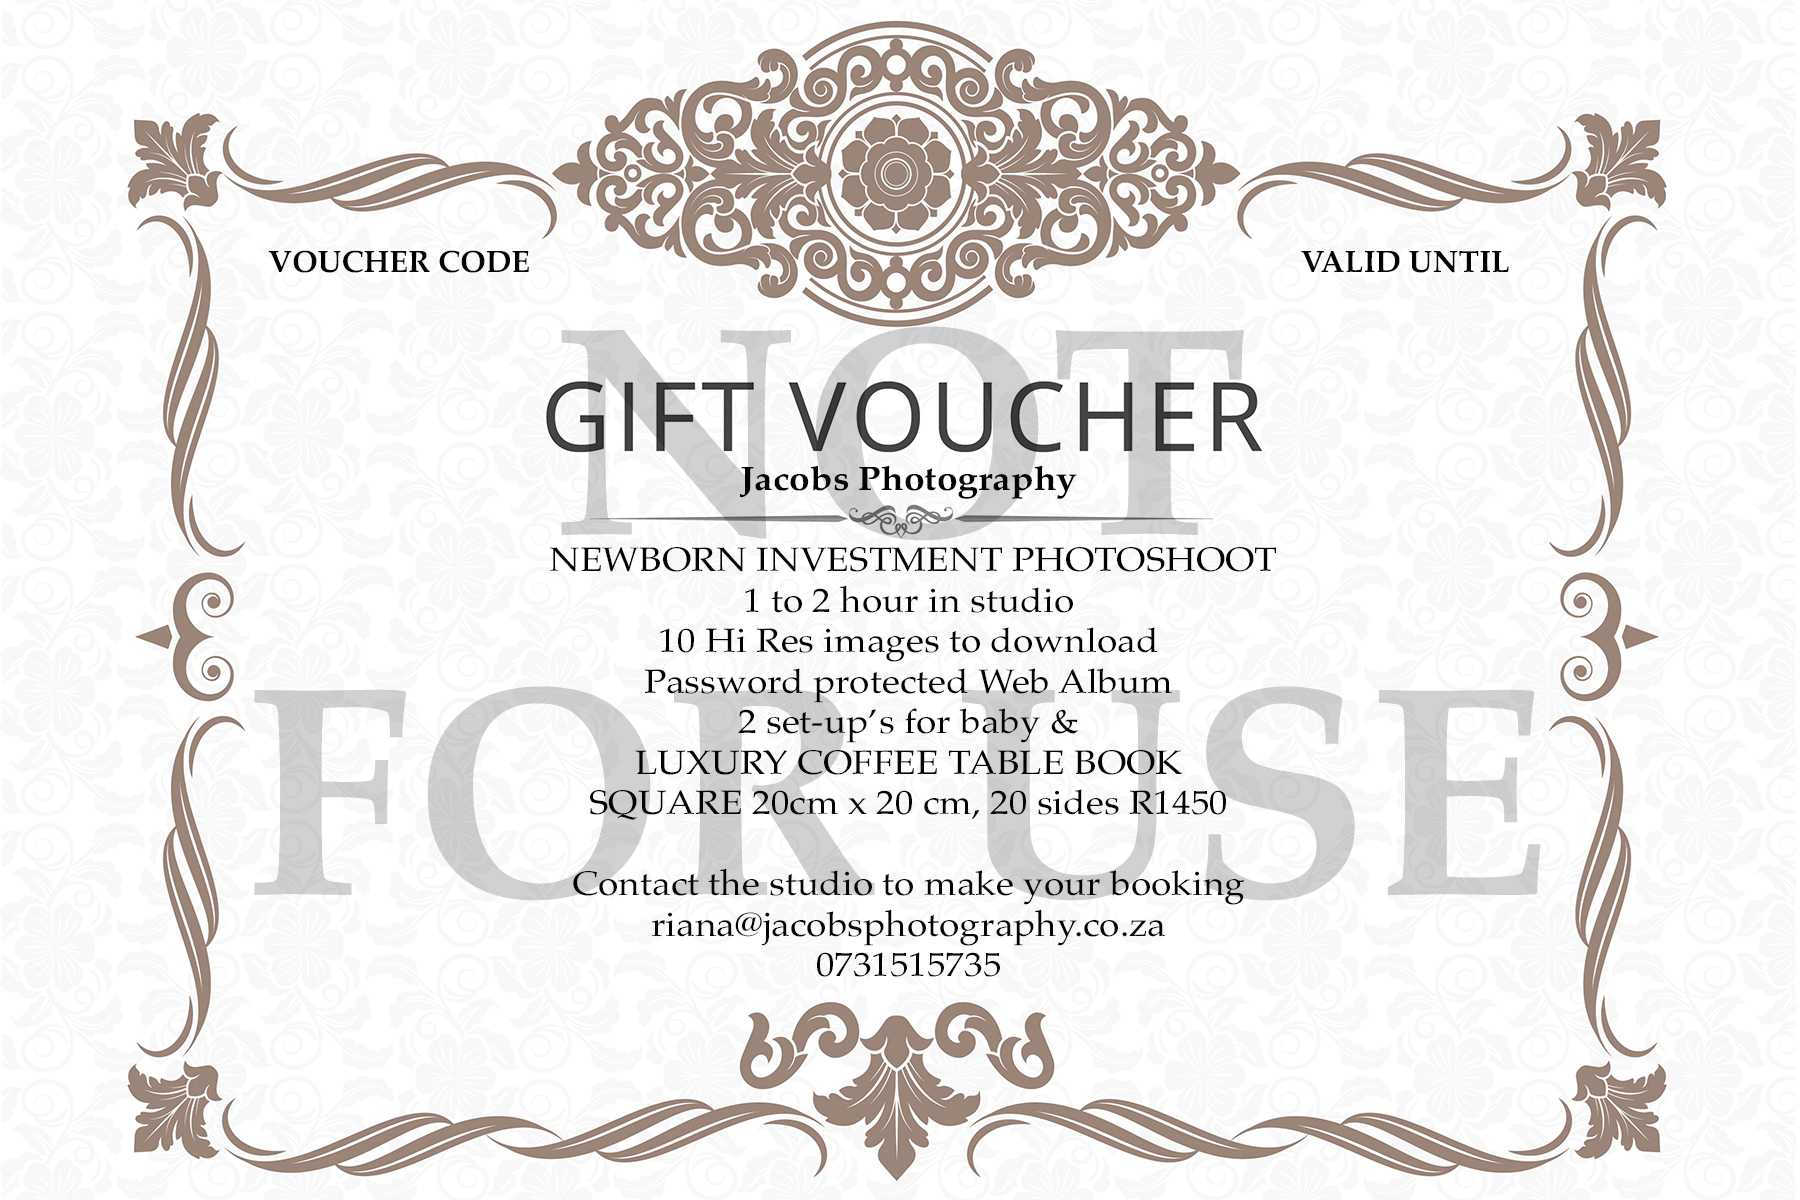 Jacobs Photography – Gift Certificates Within Photoshoot Gift Certificate Template